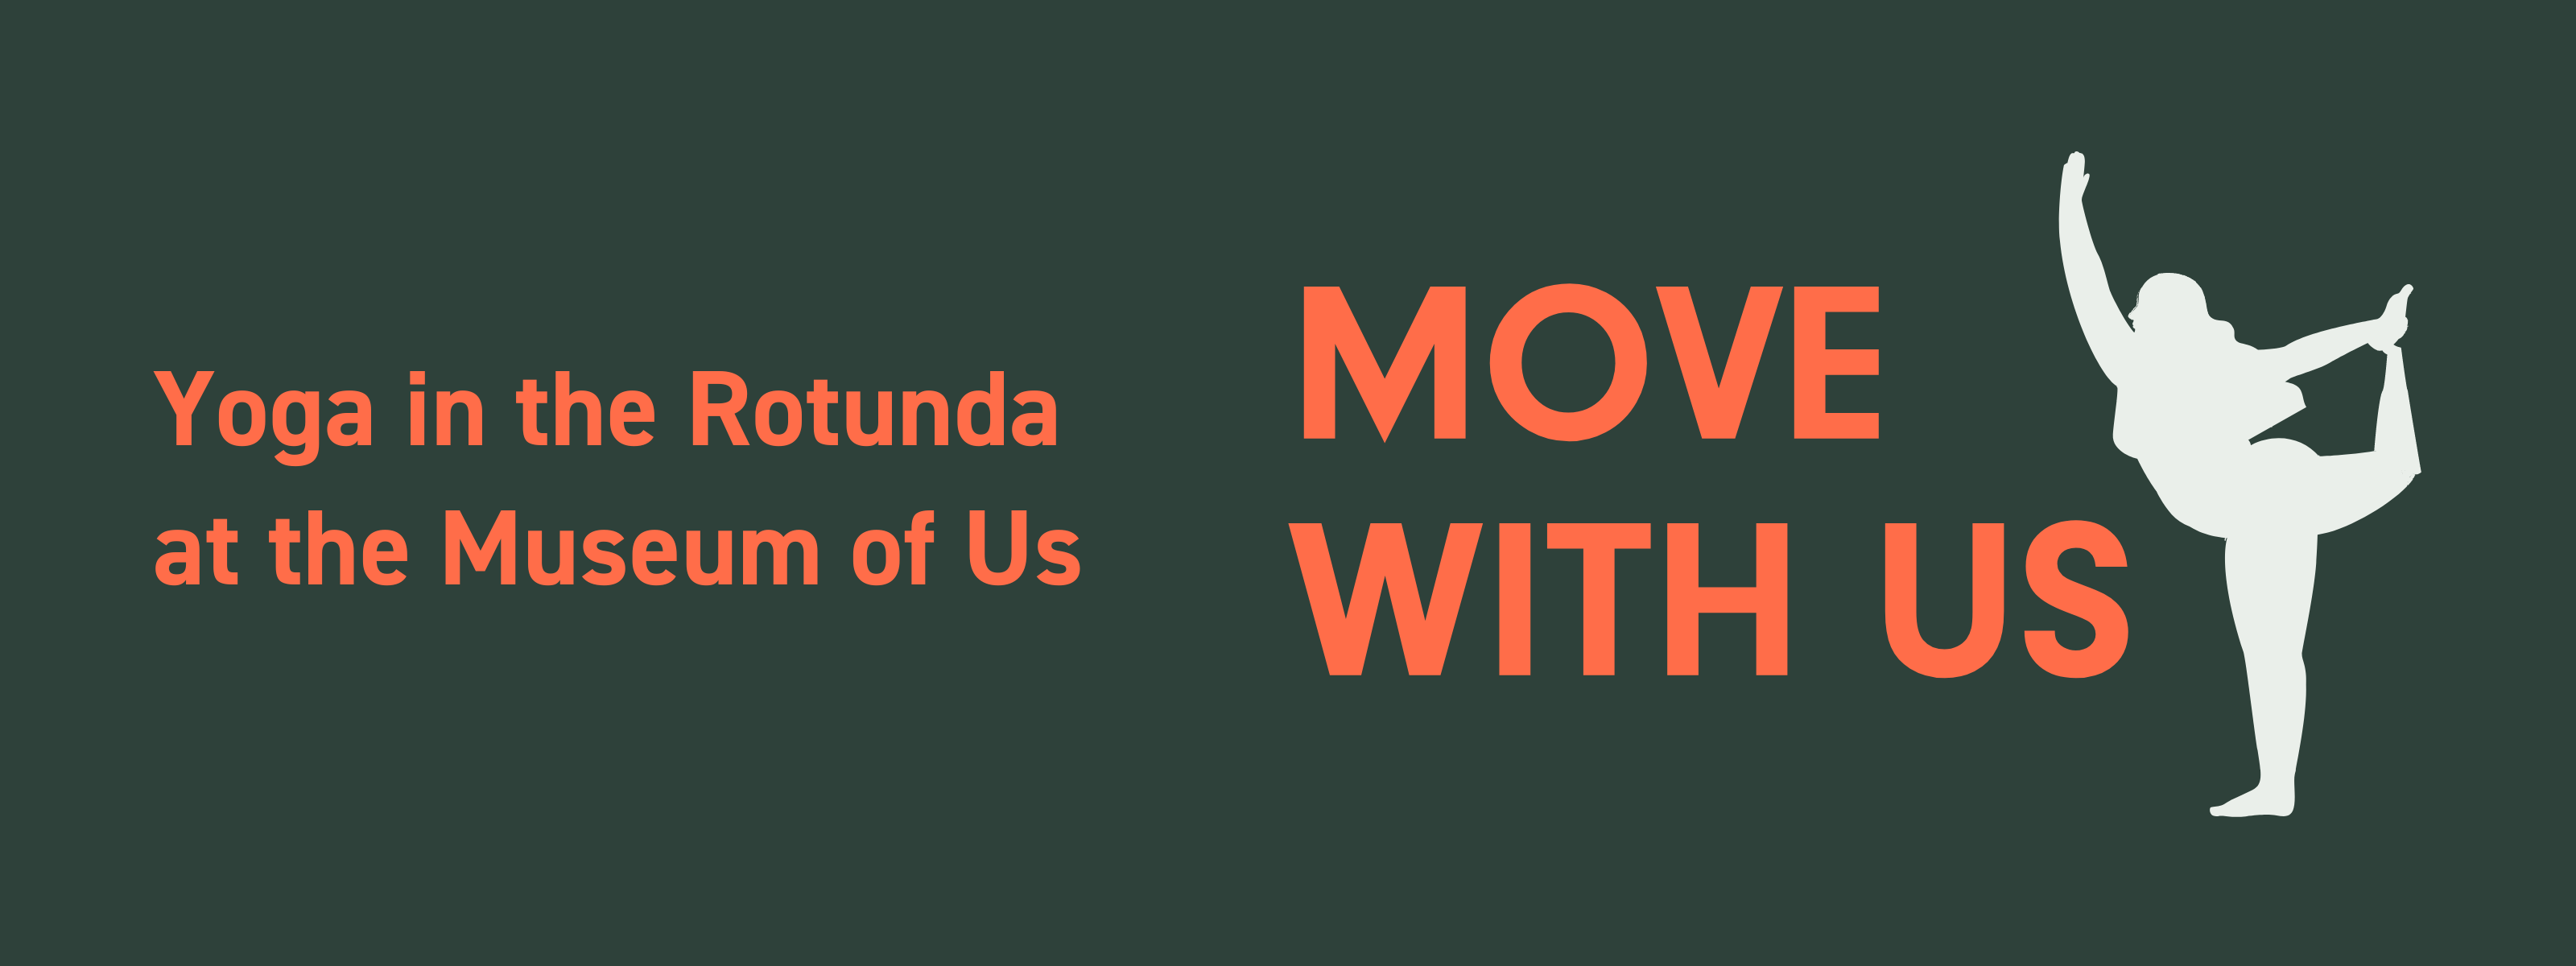 On a dark green background, orange text reads "Yoga in the Rotunda at the Museum of Us" and "Move with Us" next to a white silhouette figure in a yoga pose.